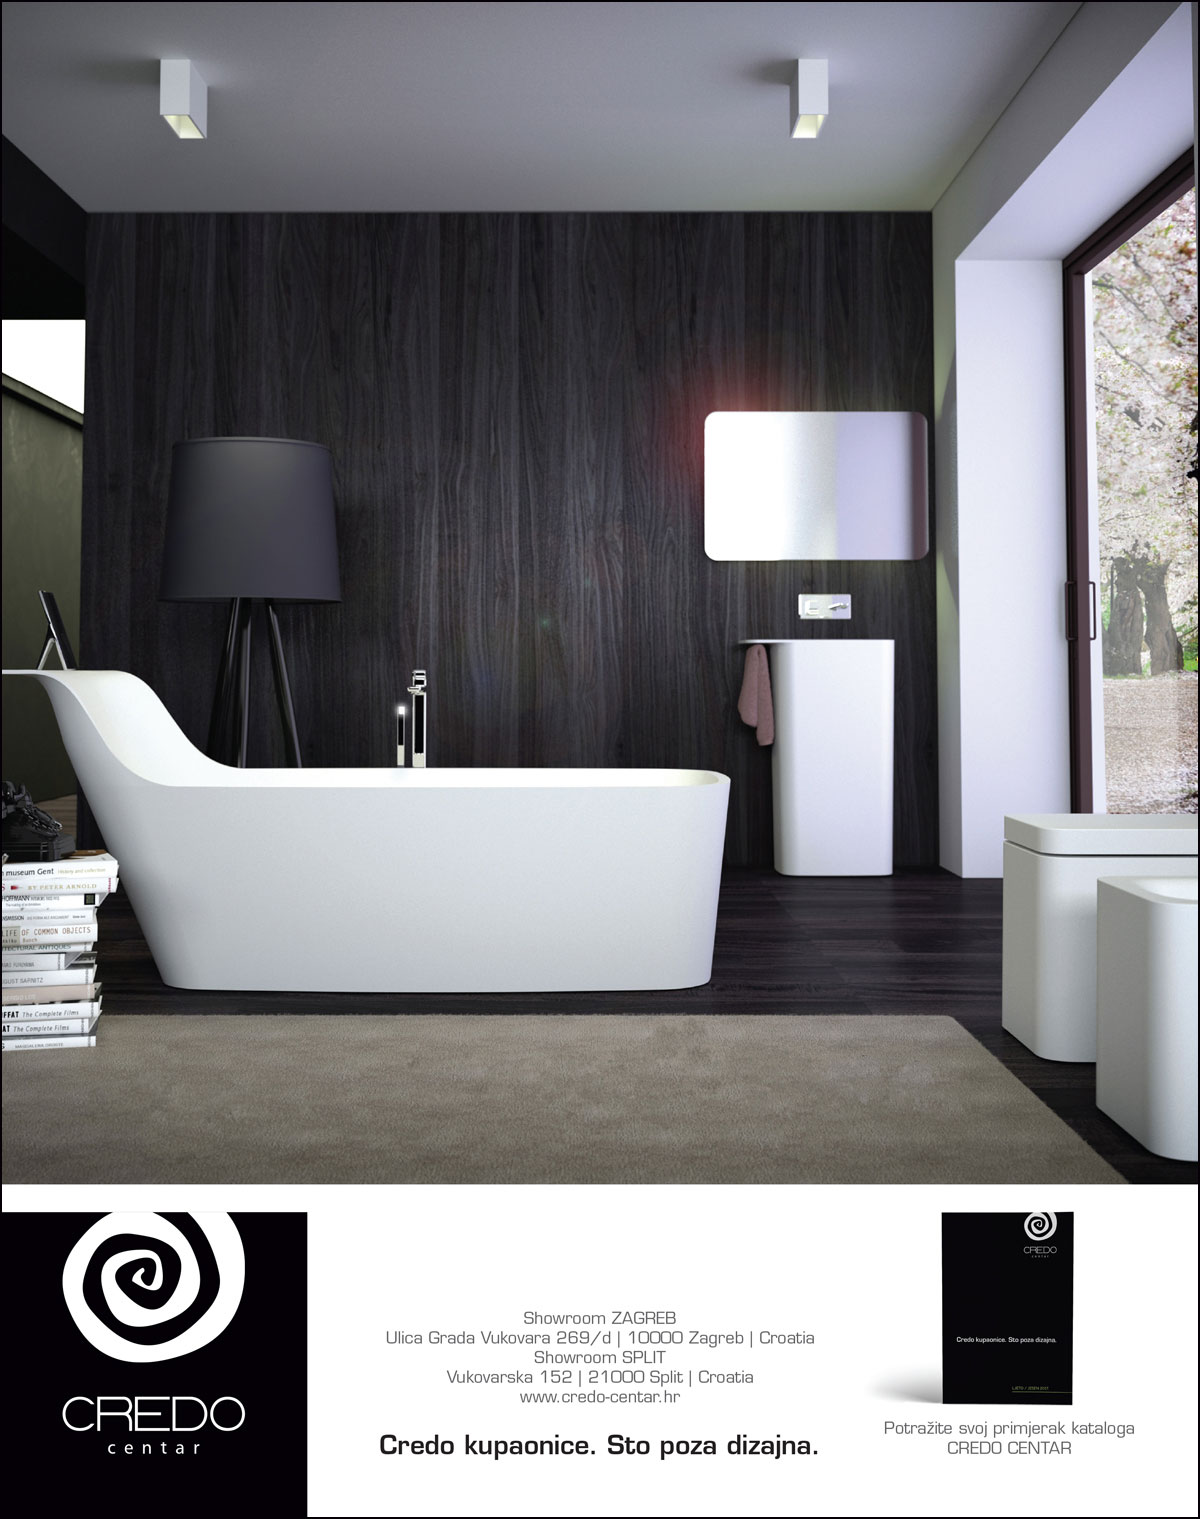 Ad design for the Credo Center from Zagreb, Croatia. The picture shows a photo of a bathroom with a brown floor and dark walls. The main star is the white bathtub and modern sink. The whole photo looks extremely classy and expensive. In the lower part there is information about Credo Center and their logo.